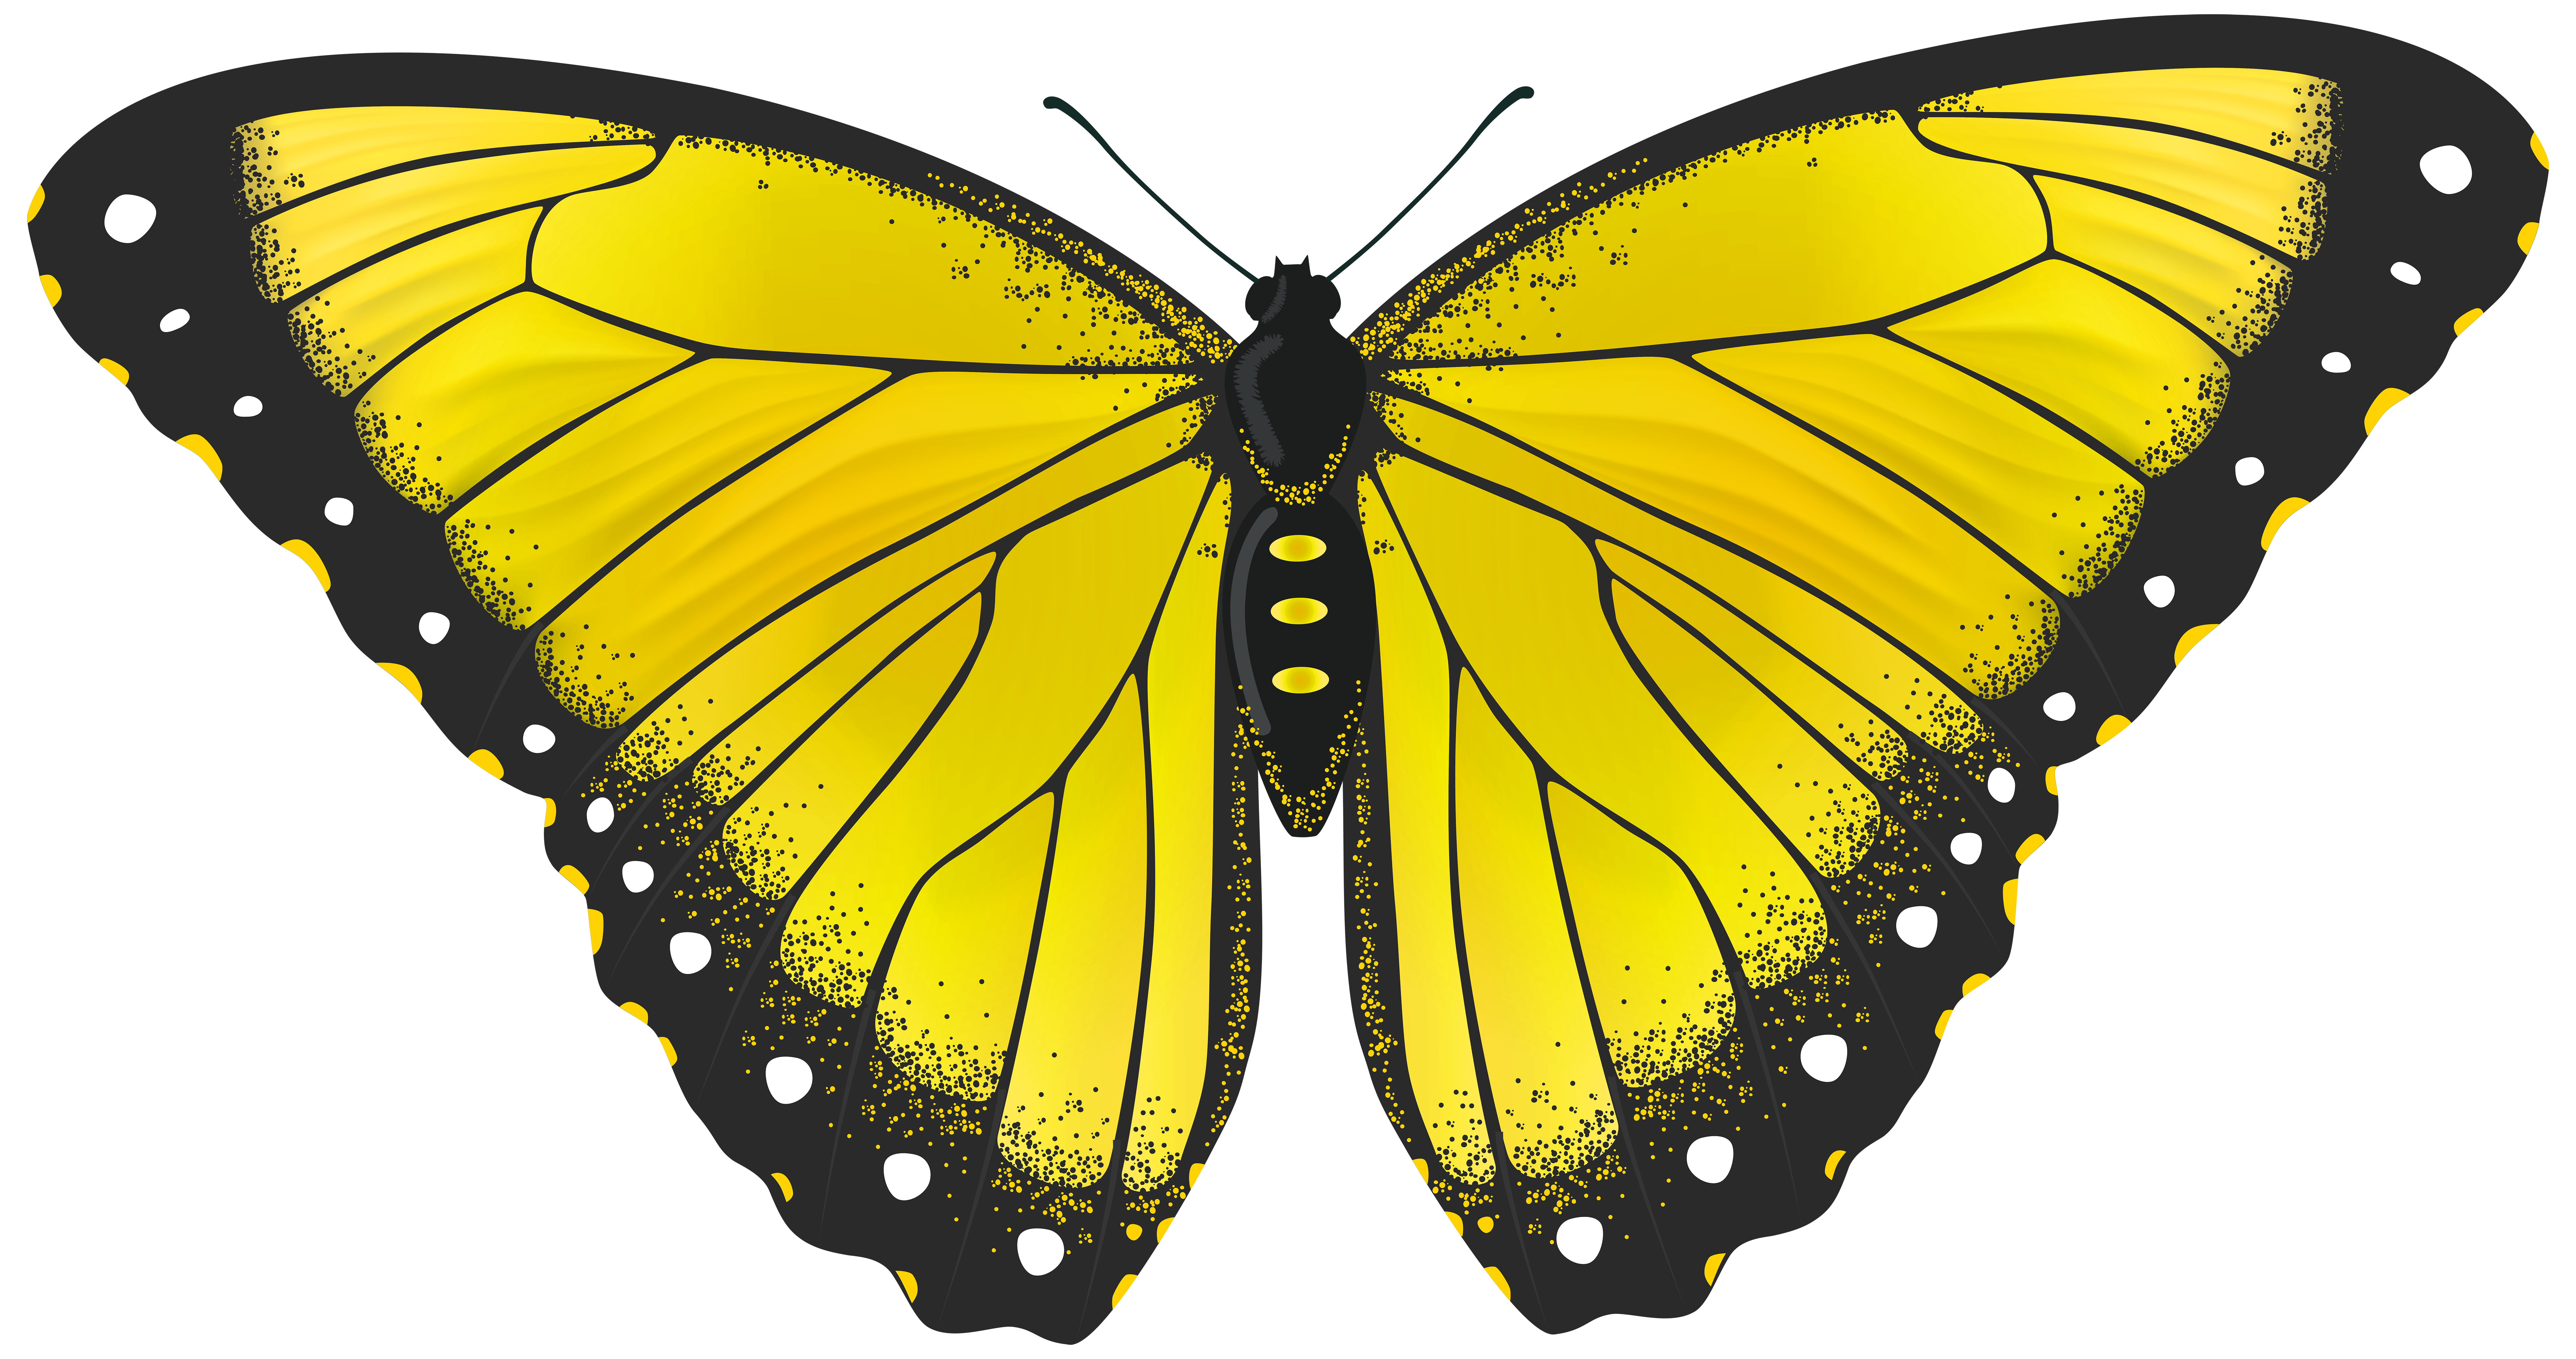 Yellow Butterfly Transparent PNG Clip Art Image | Gallery ...